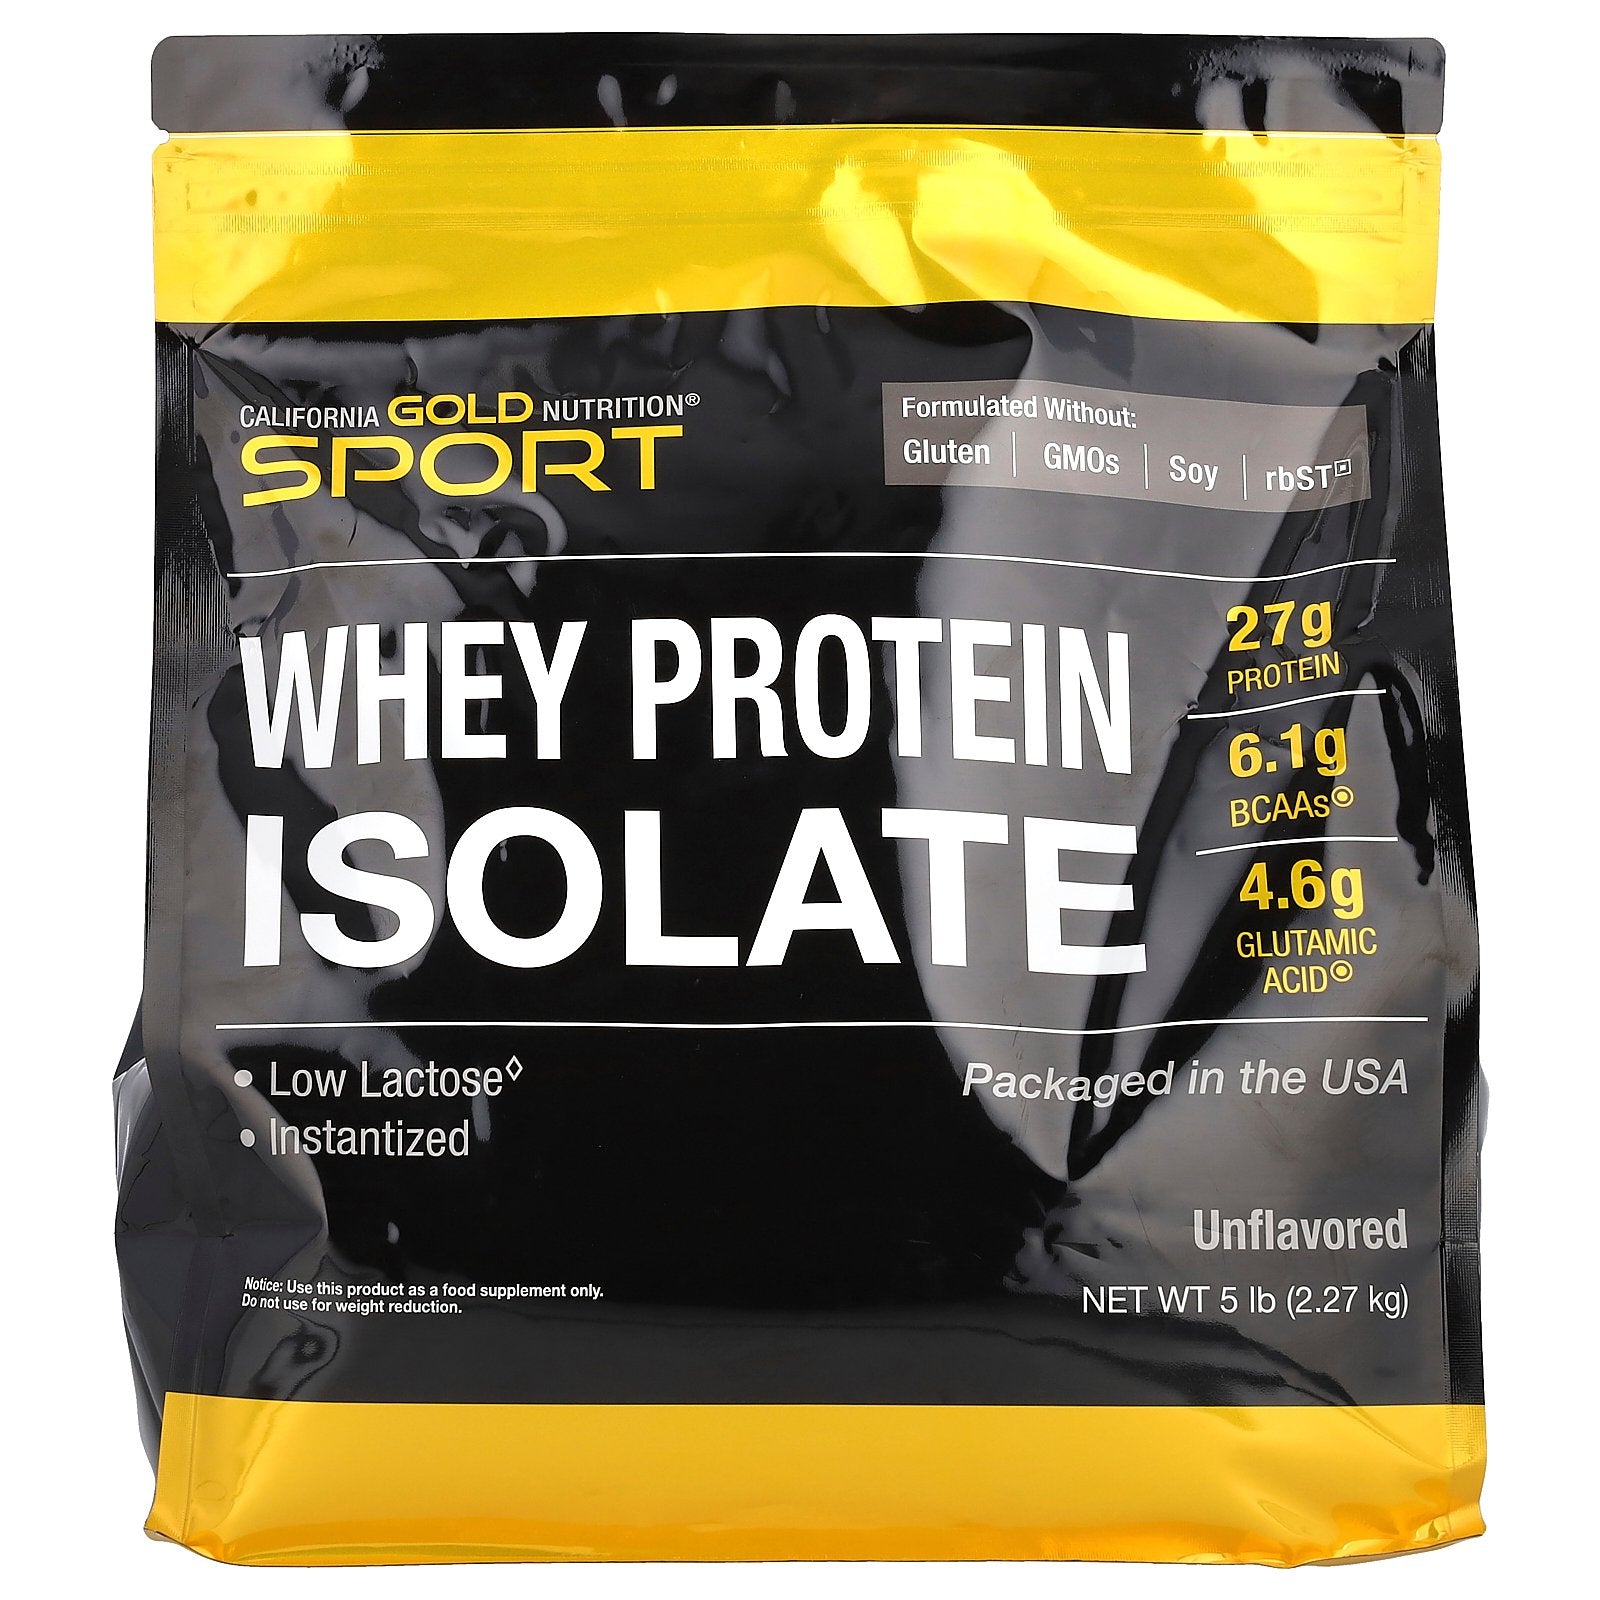 Protein – California Gold Nutrition